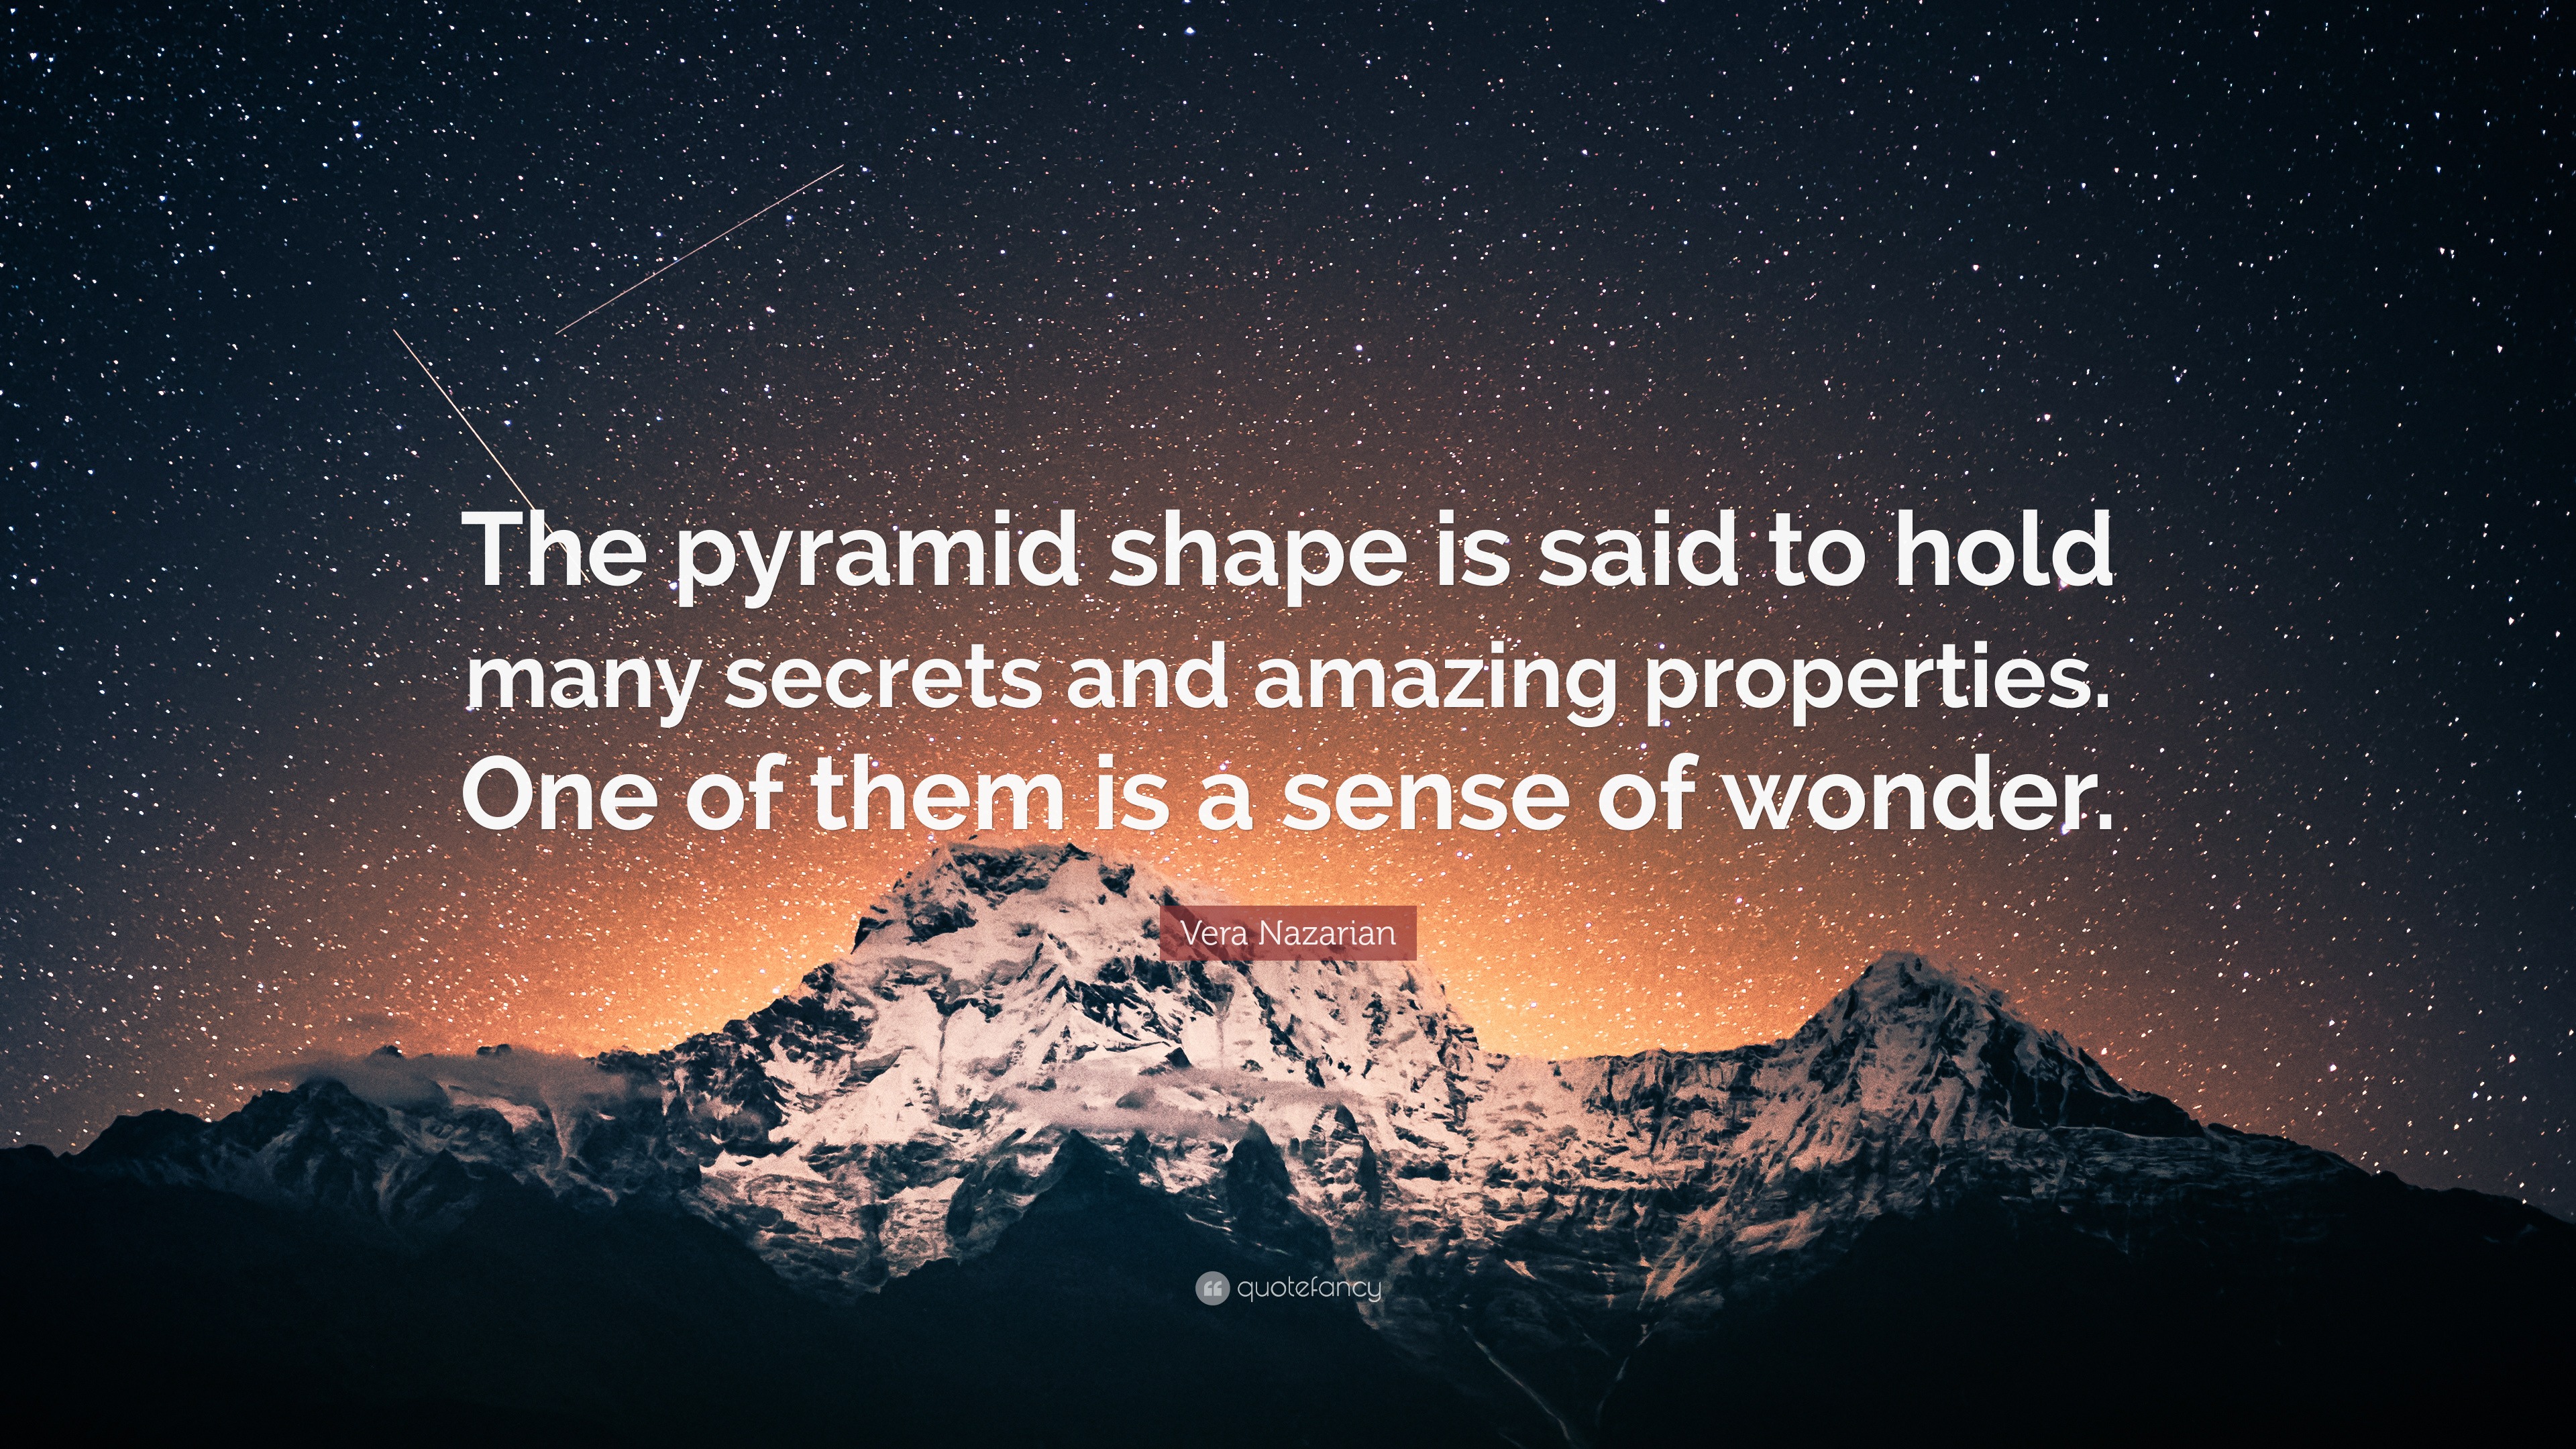 Vera Nazarian Quote: “The pyramid shape is said to hold many